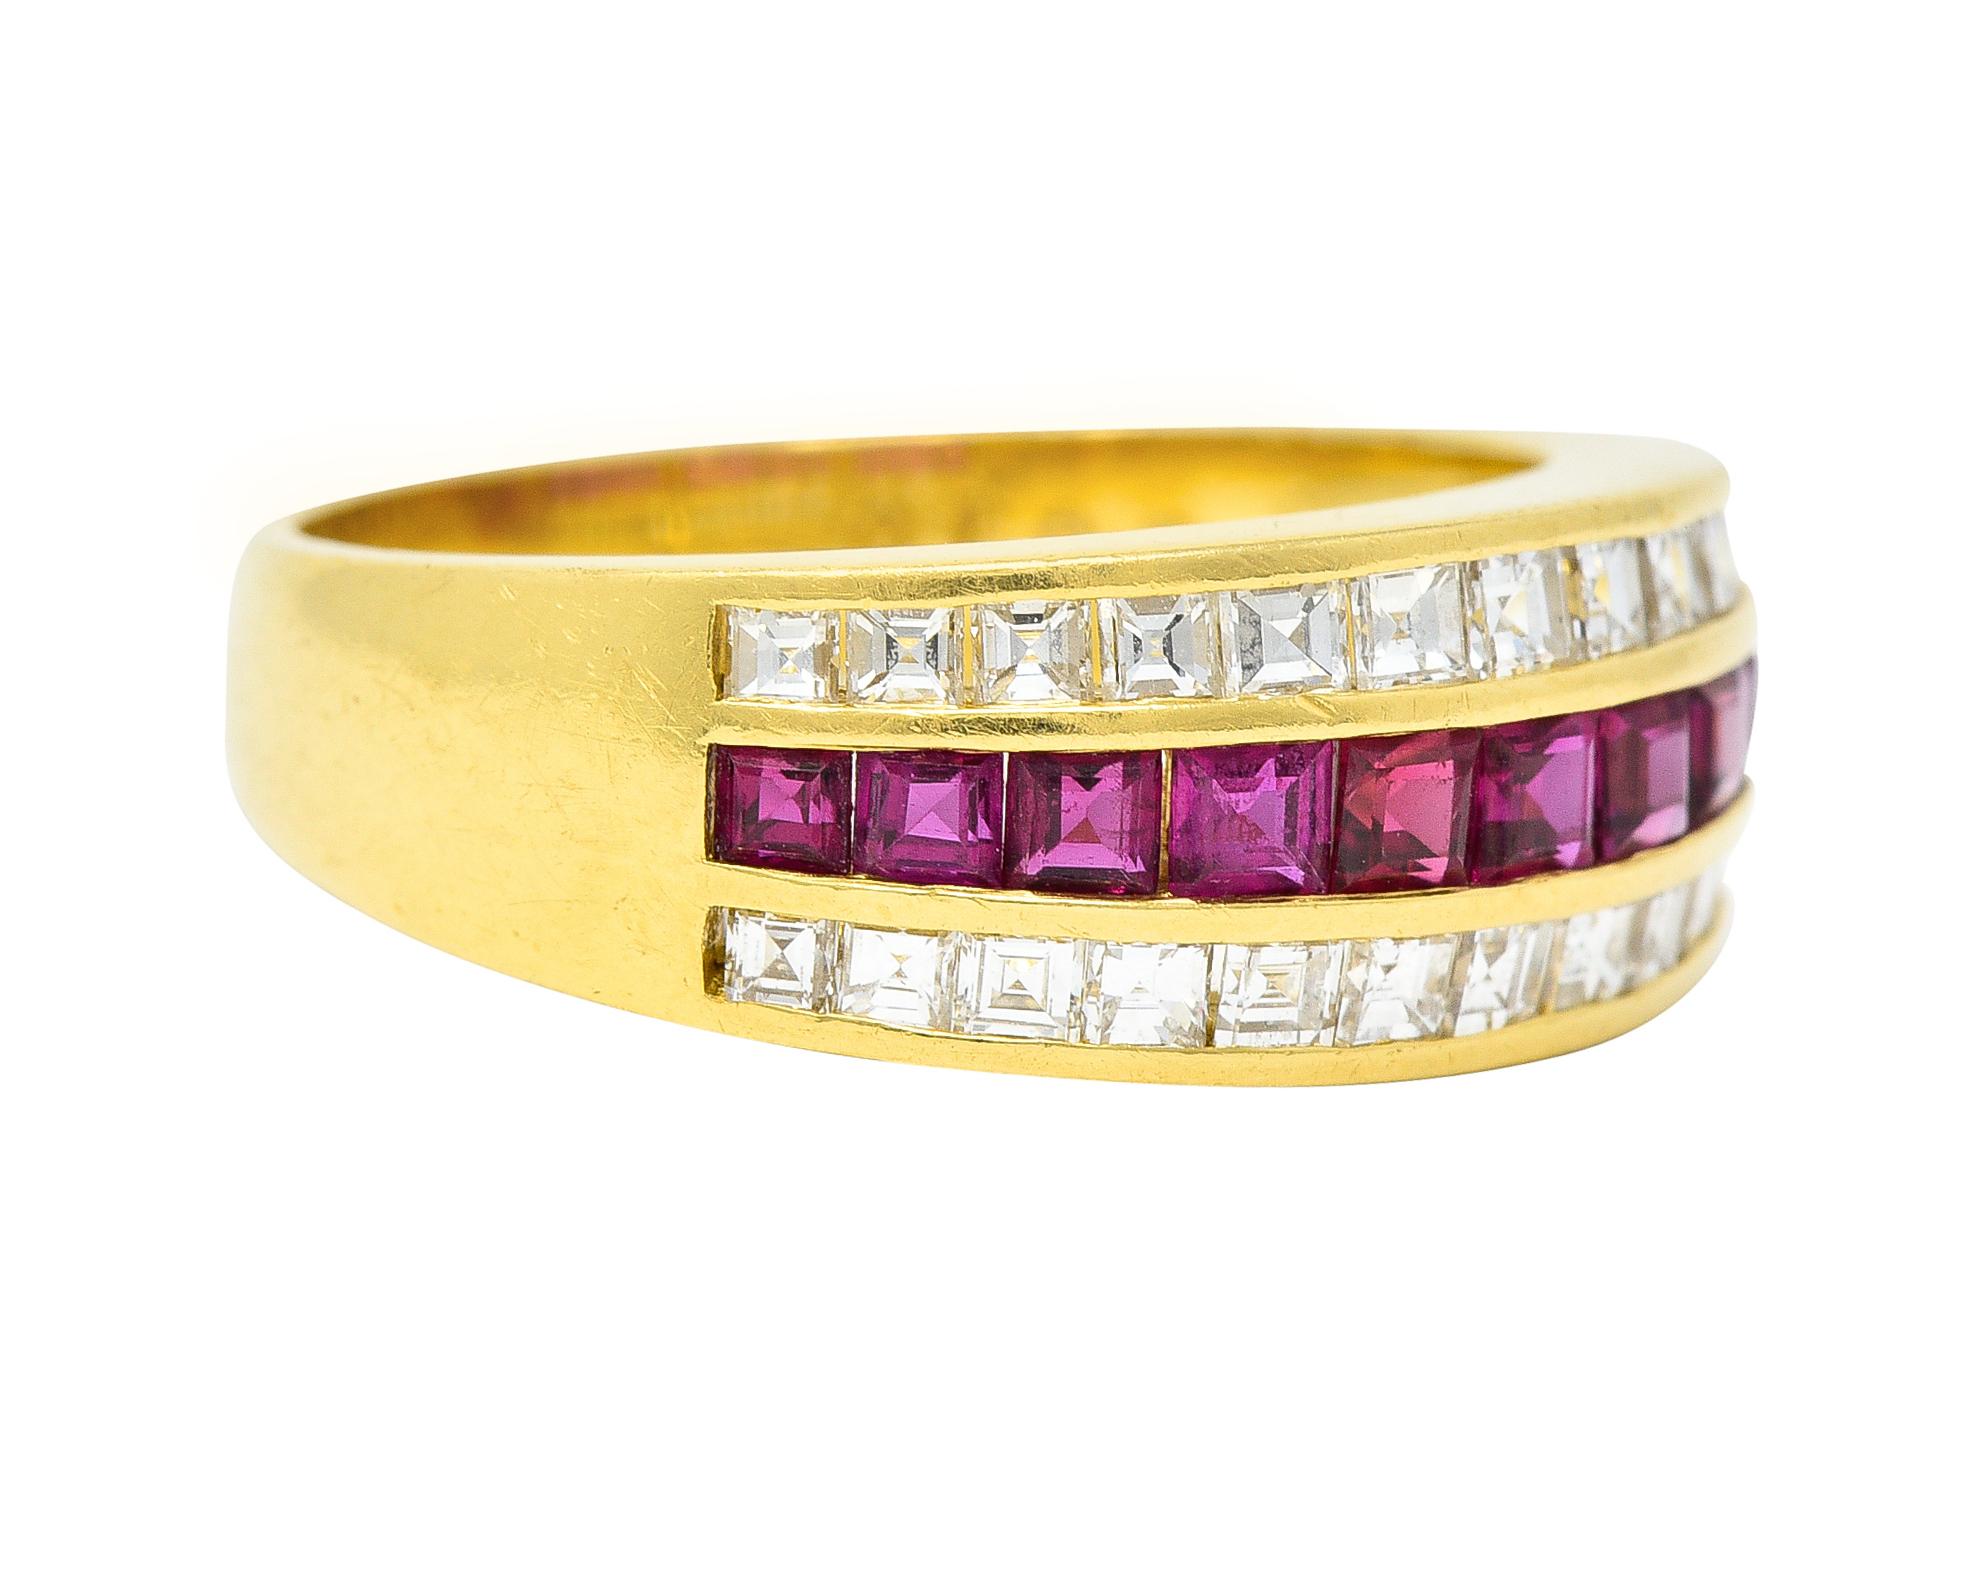 Designed as three stacked rows of alternating channel set square step-cut diamonds and rubies 
Diamonds weigh 0.70 carat total - G/H with VS clarity
Rubies weigh 0.72 carat total - transparent medium purplish-red in color 
Completed by high polish